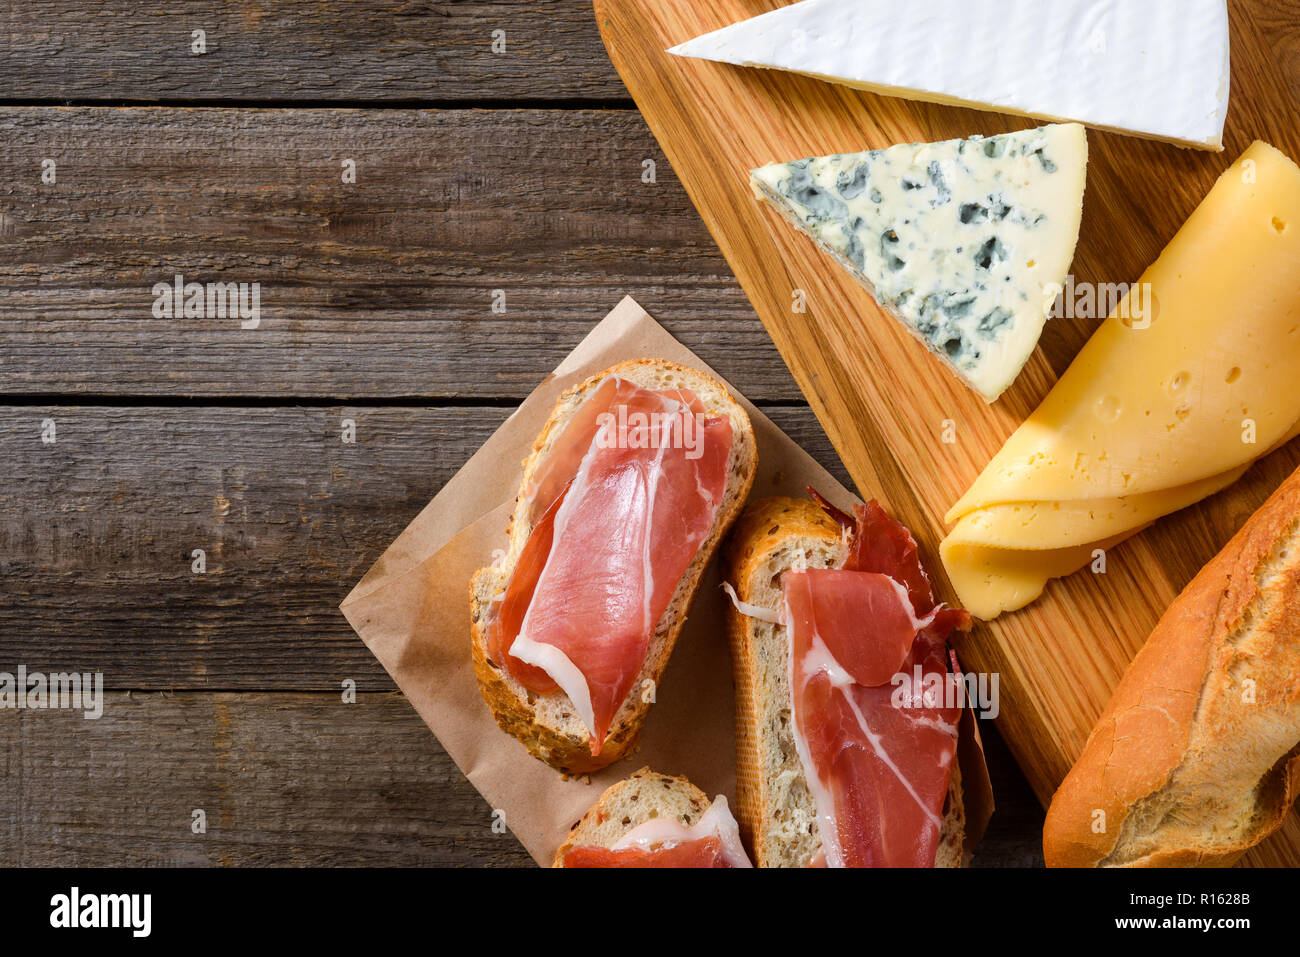 Cheese, bread and meat. Brie, Dorblu and Gouda are good addition Stock Photo